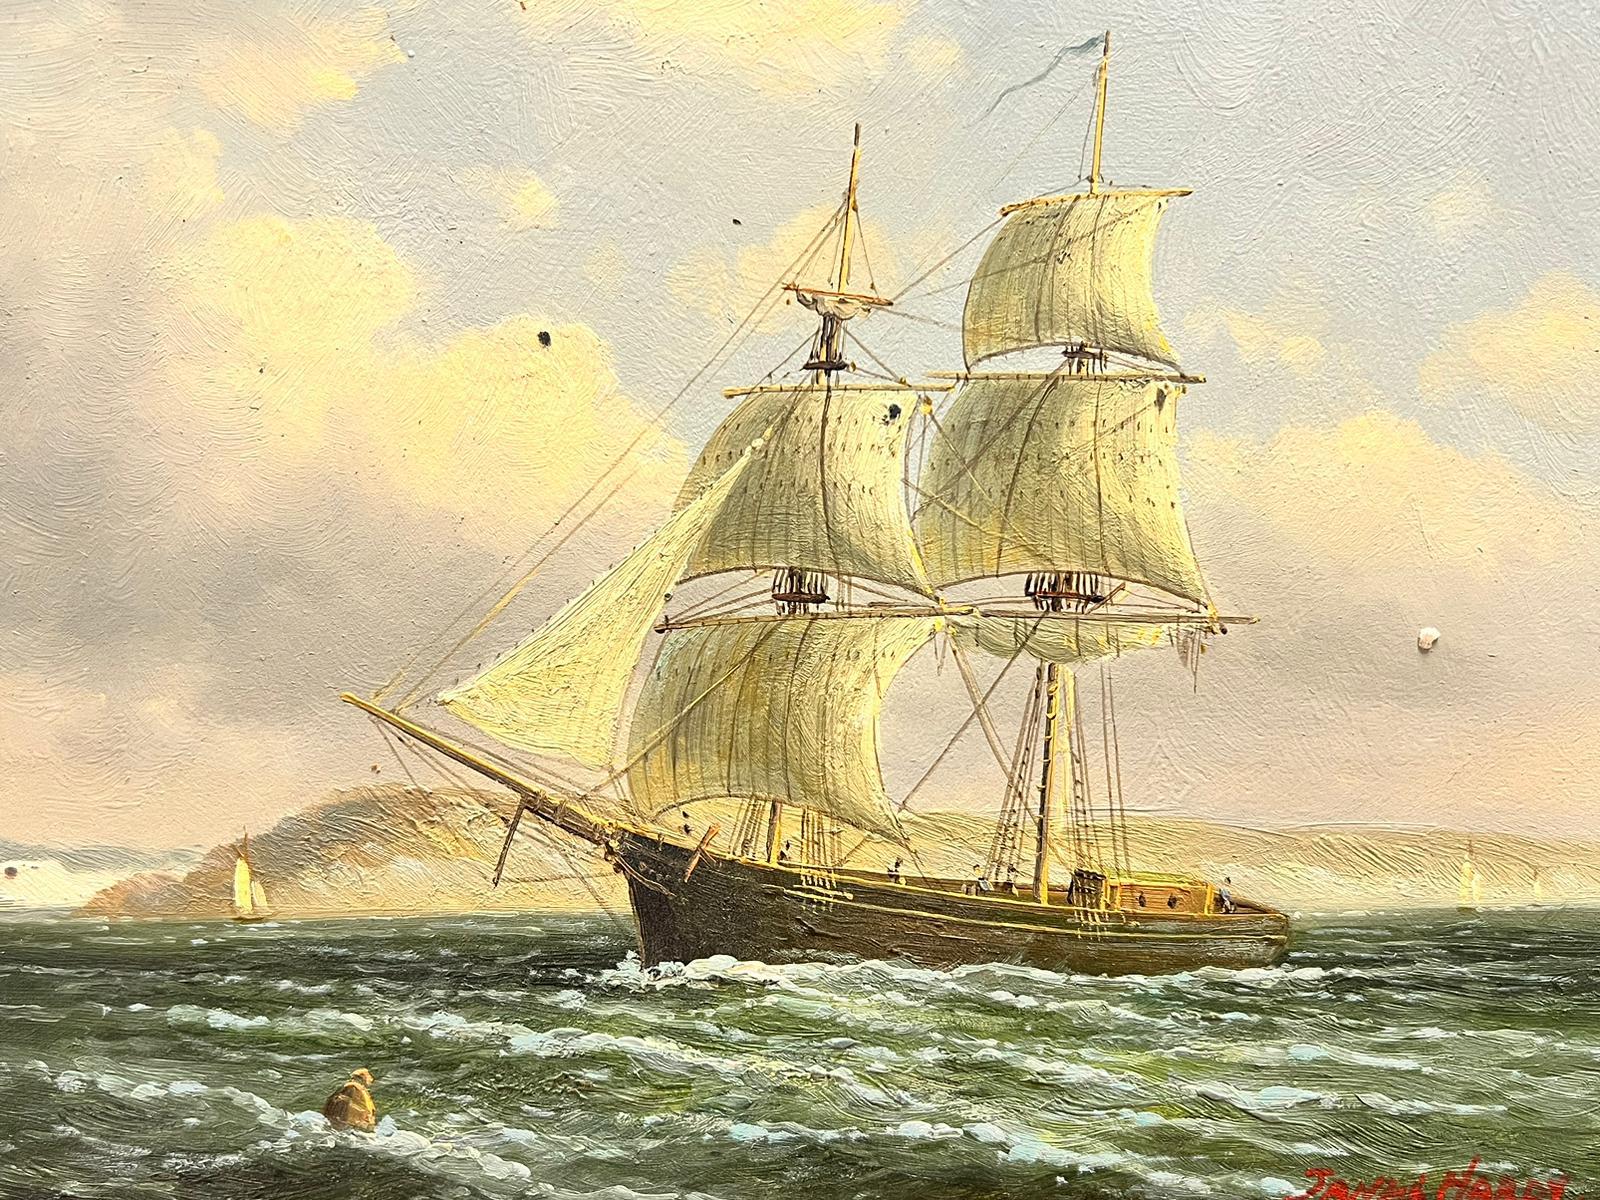 Classic Tall Sailing Ship in Choppy Waters off Coastline, signed oil painting - Painting by James Hardy